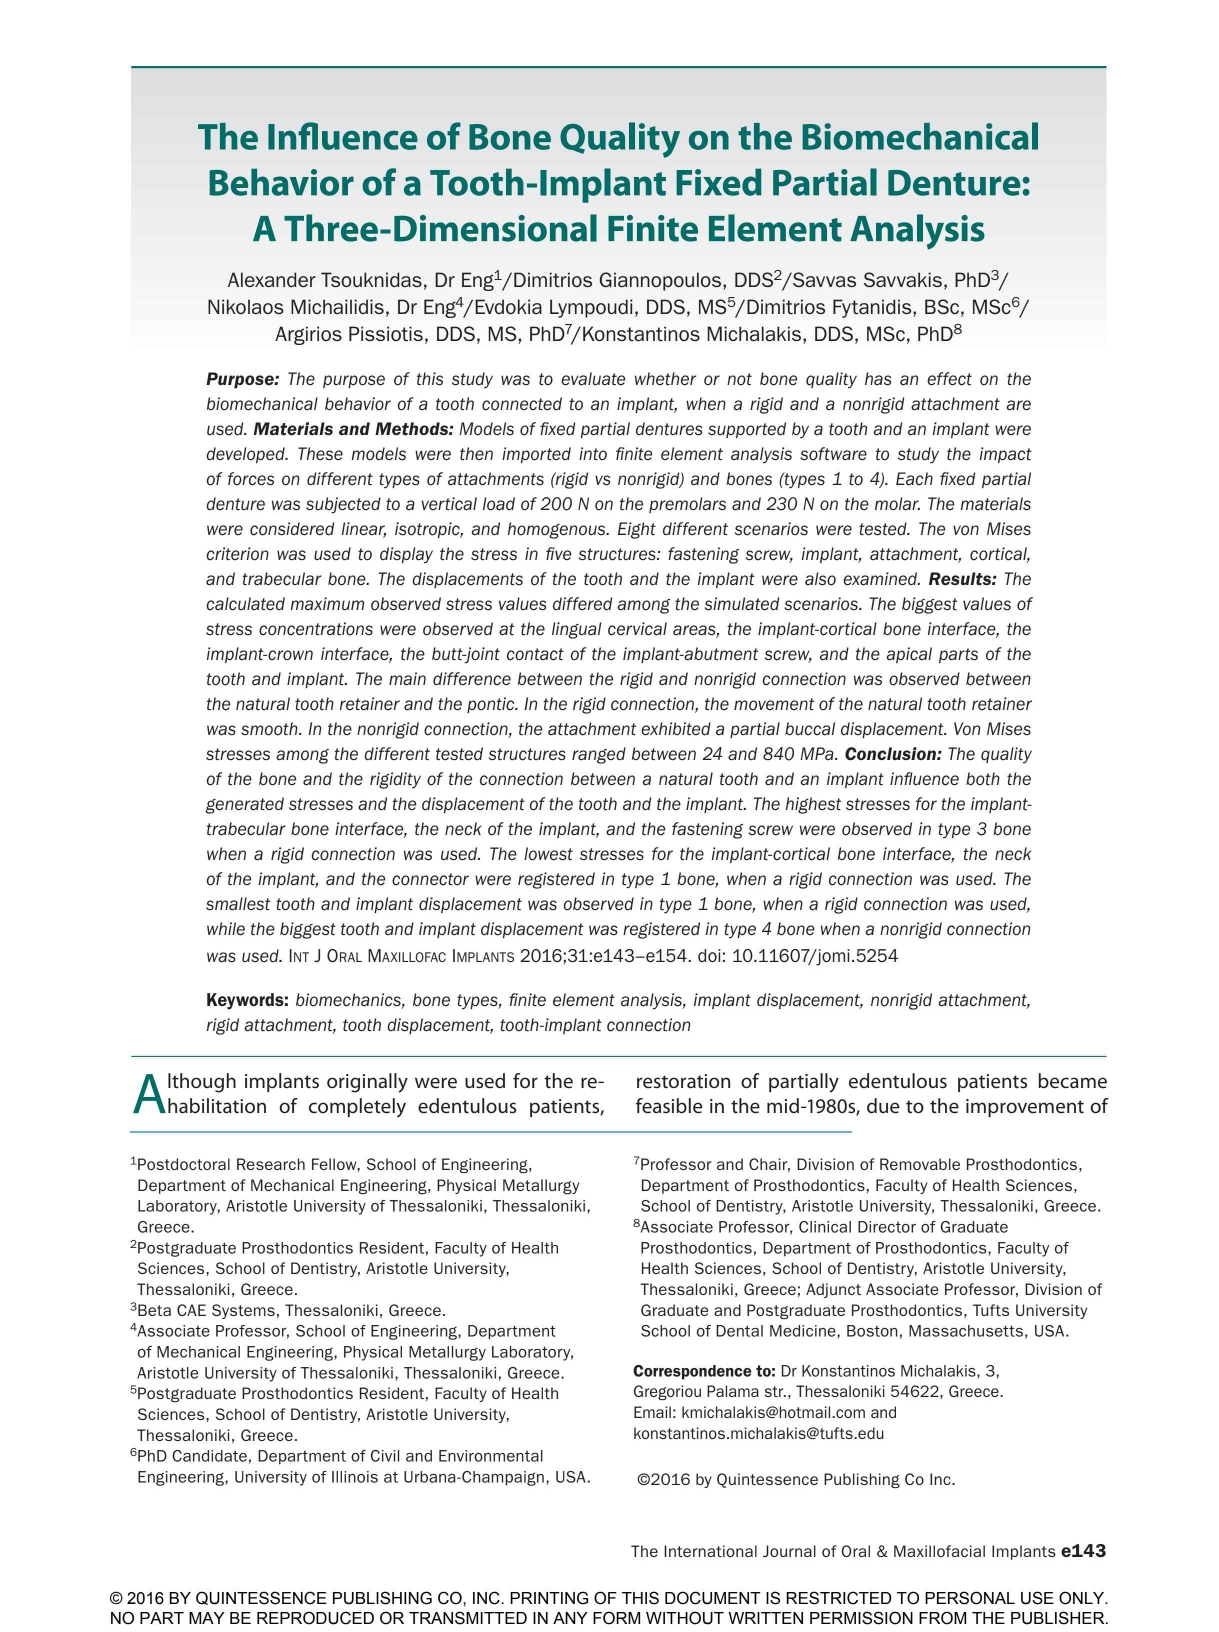 The influence of bone quality on the biomechanical behavior of a tooth-implant fixed partial denture A three-dimensional finite element analysis_page-0001.jpg